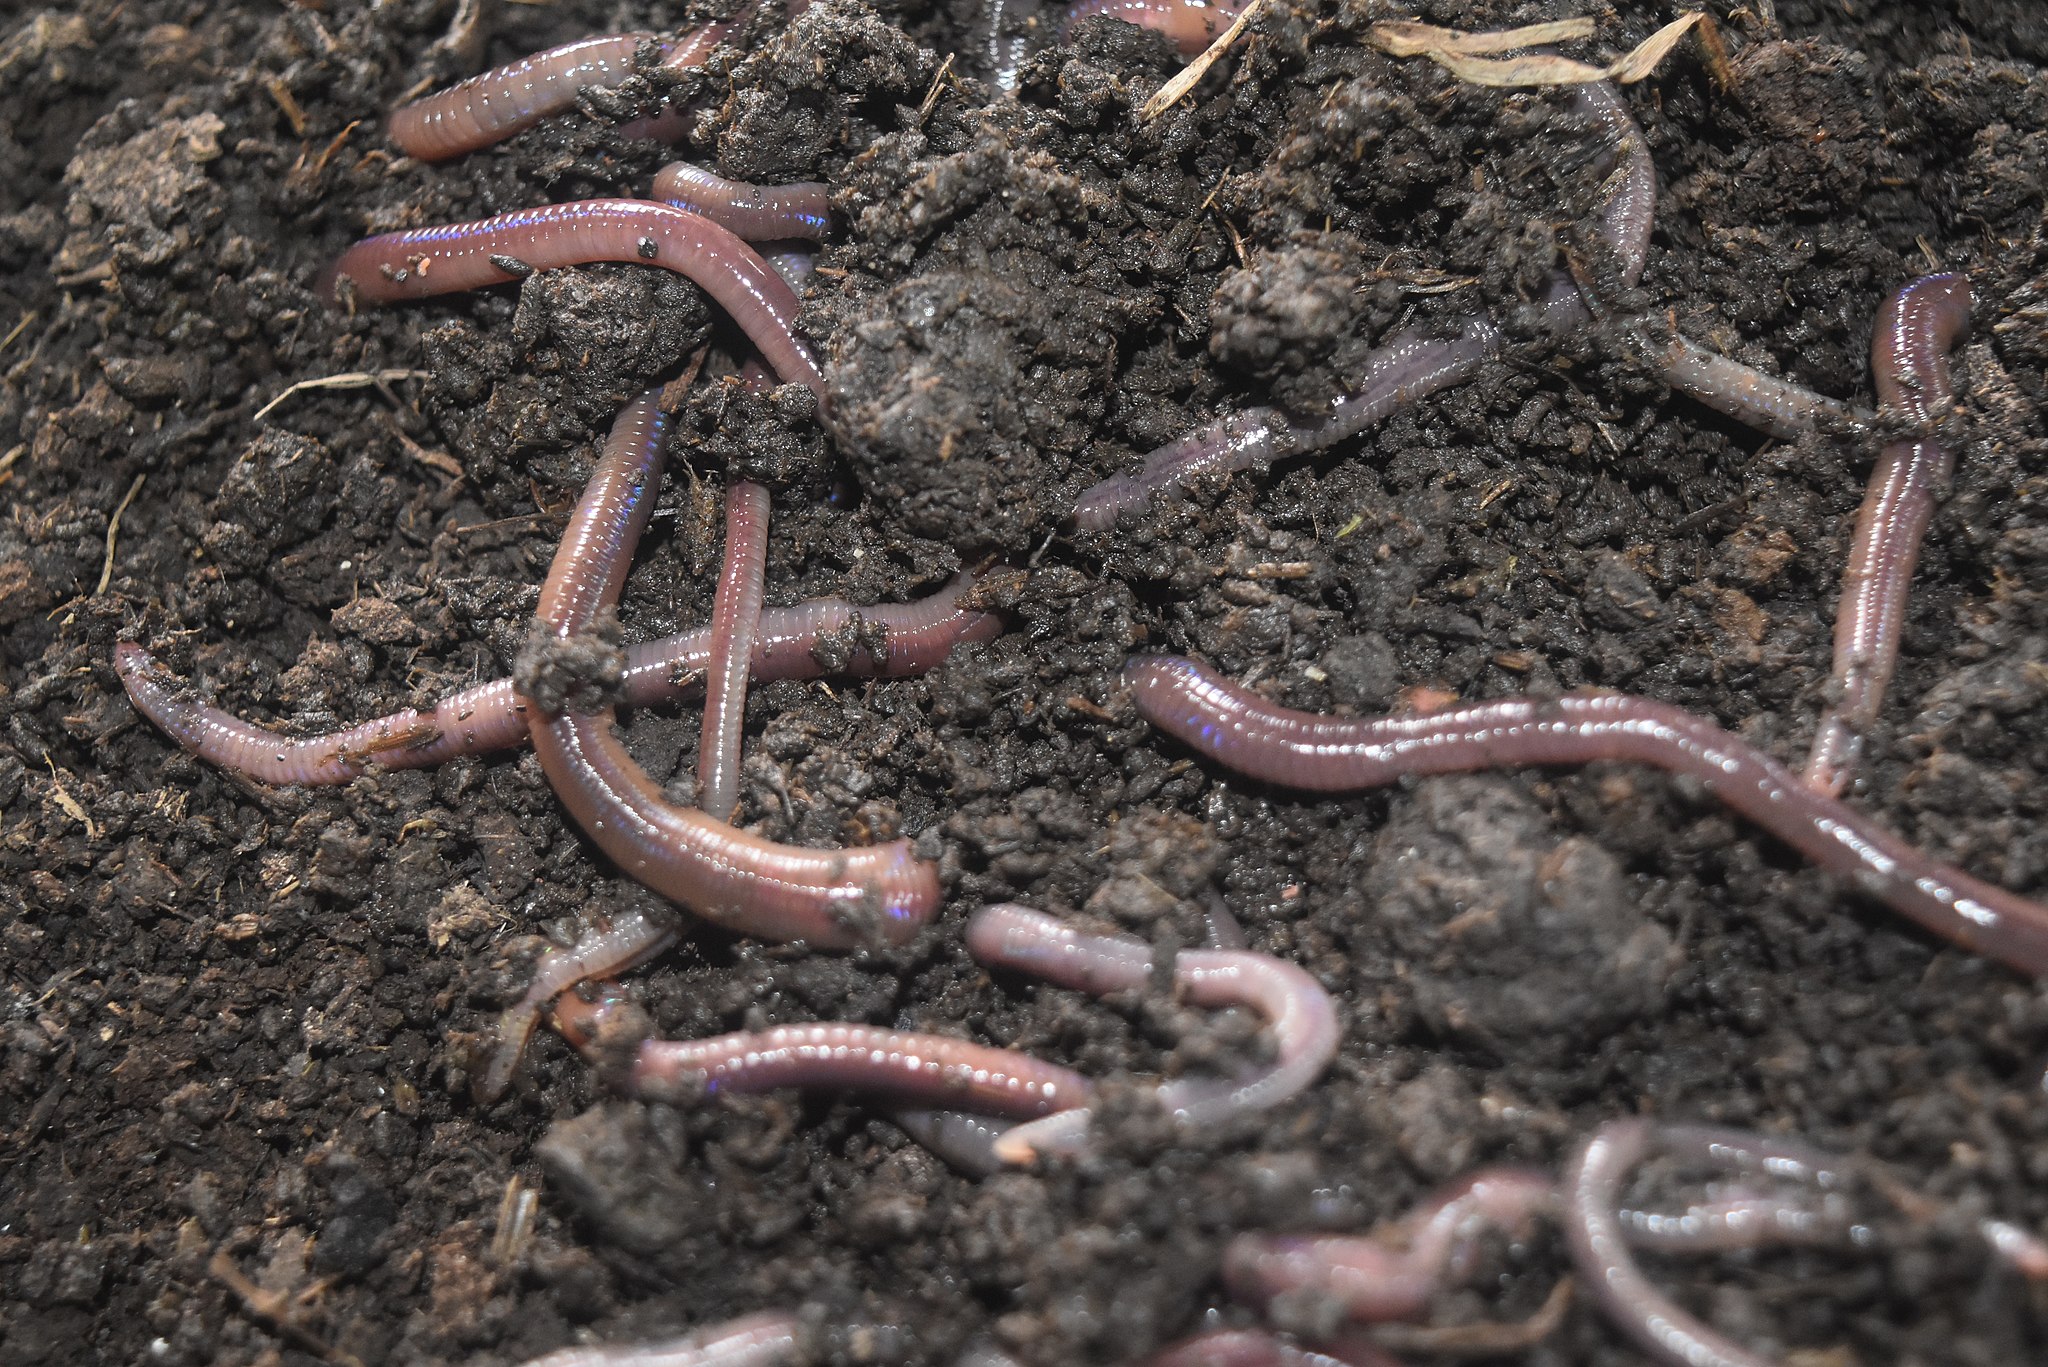 Invasive earthworms are burrowing into boreal forests worldwide